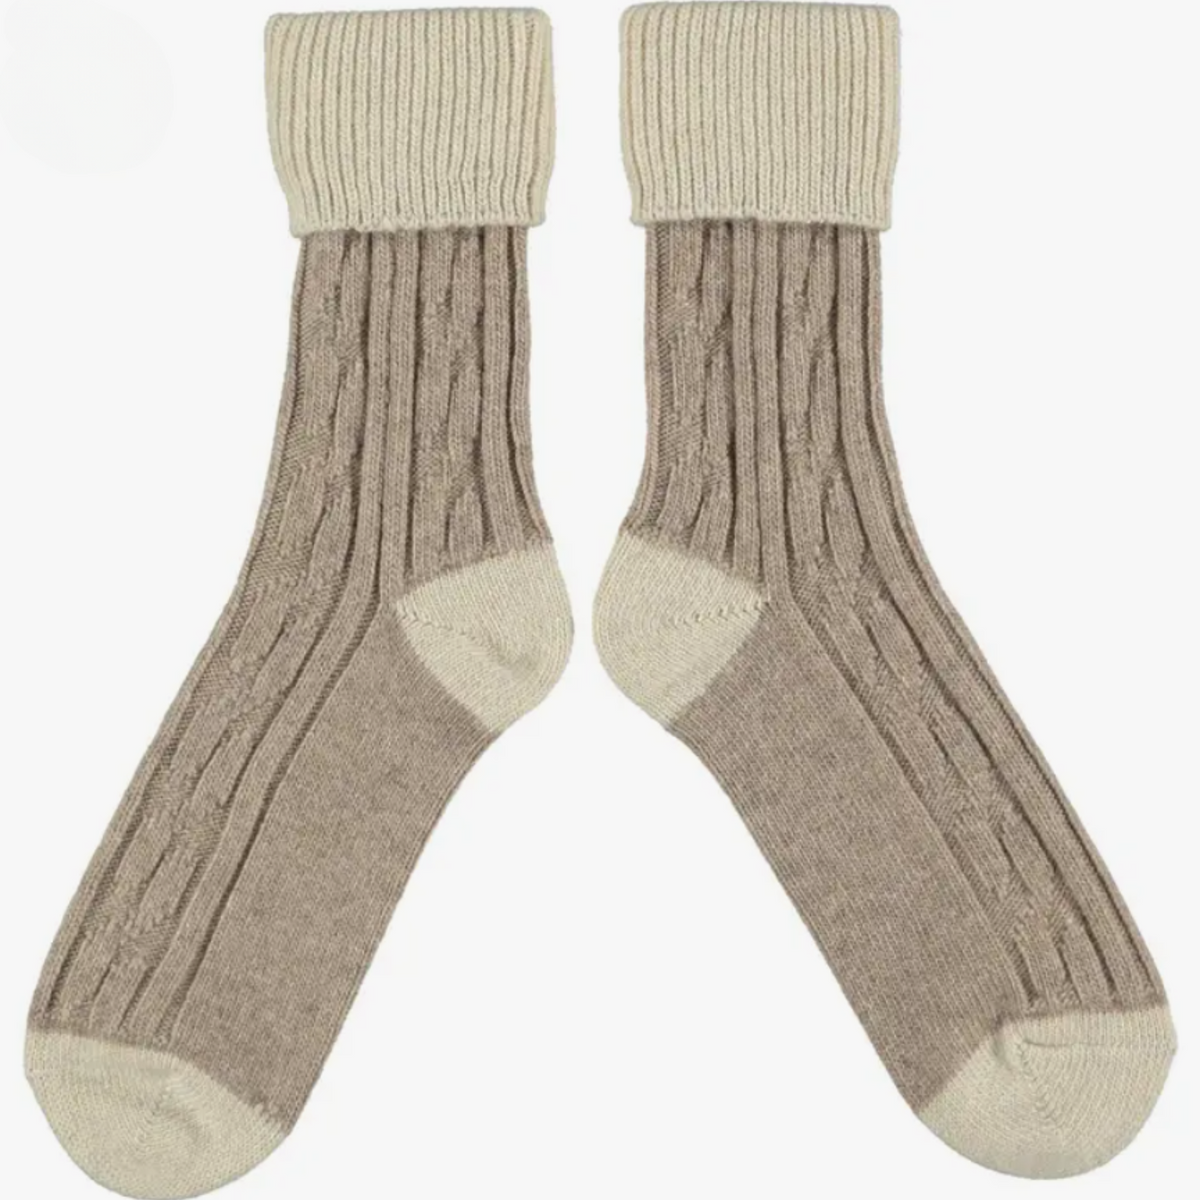 Catherine Tough Slouch Cashmere Blend women&#39;s and men&#39;s crew socks featuring cable knit socks with oatmeal colored cuff, heel and toes and mushroom colored body. Socks shown on display. 